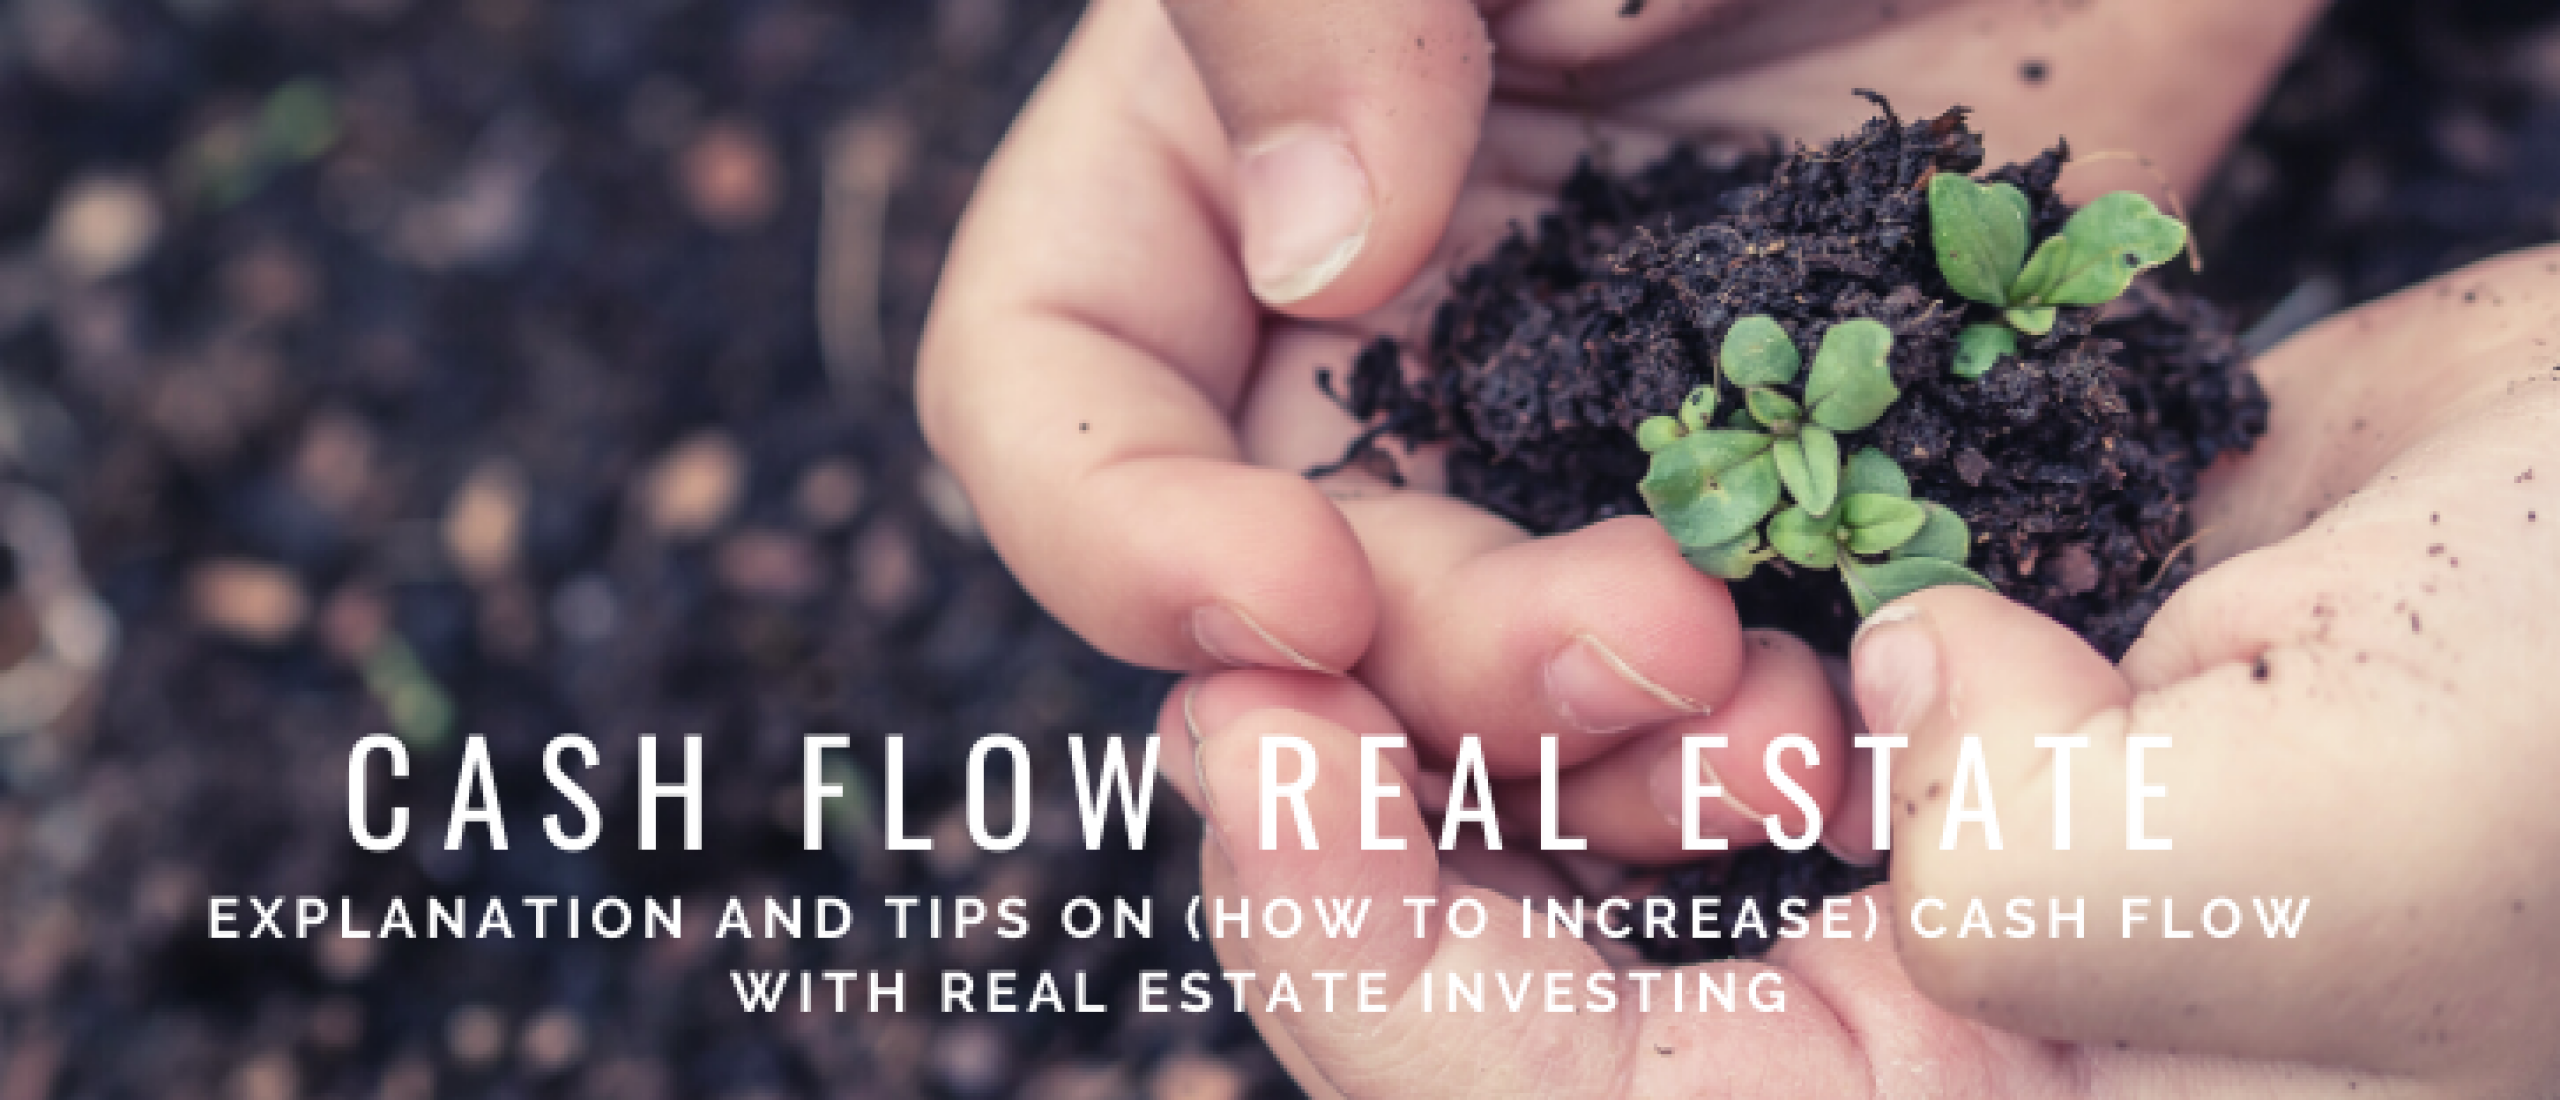 Real Estate Investing for Cash Flow Explained + Tips for More Cash